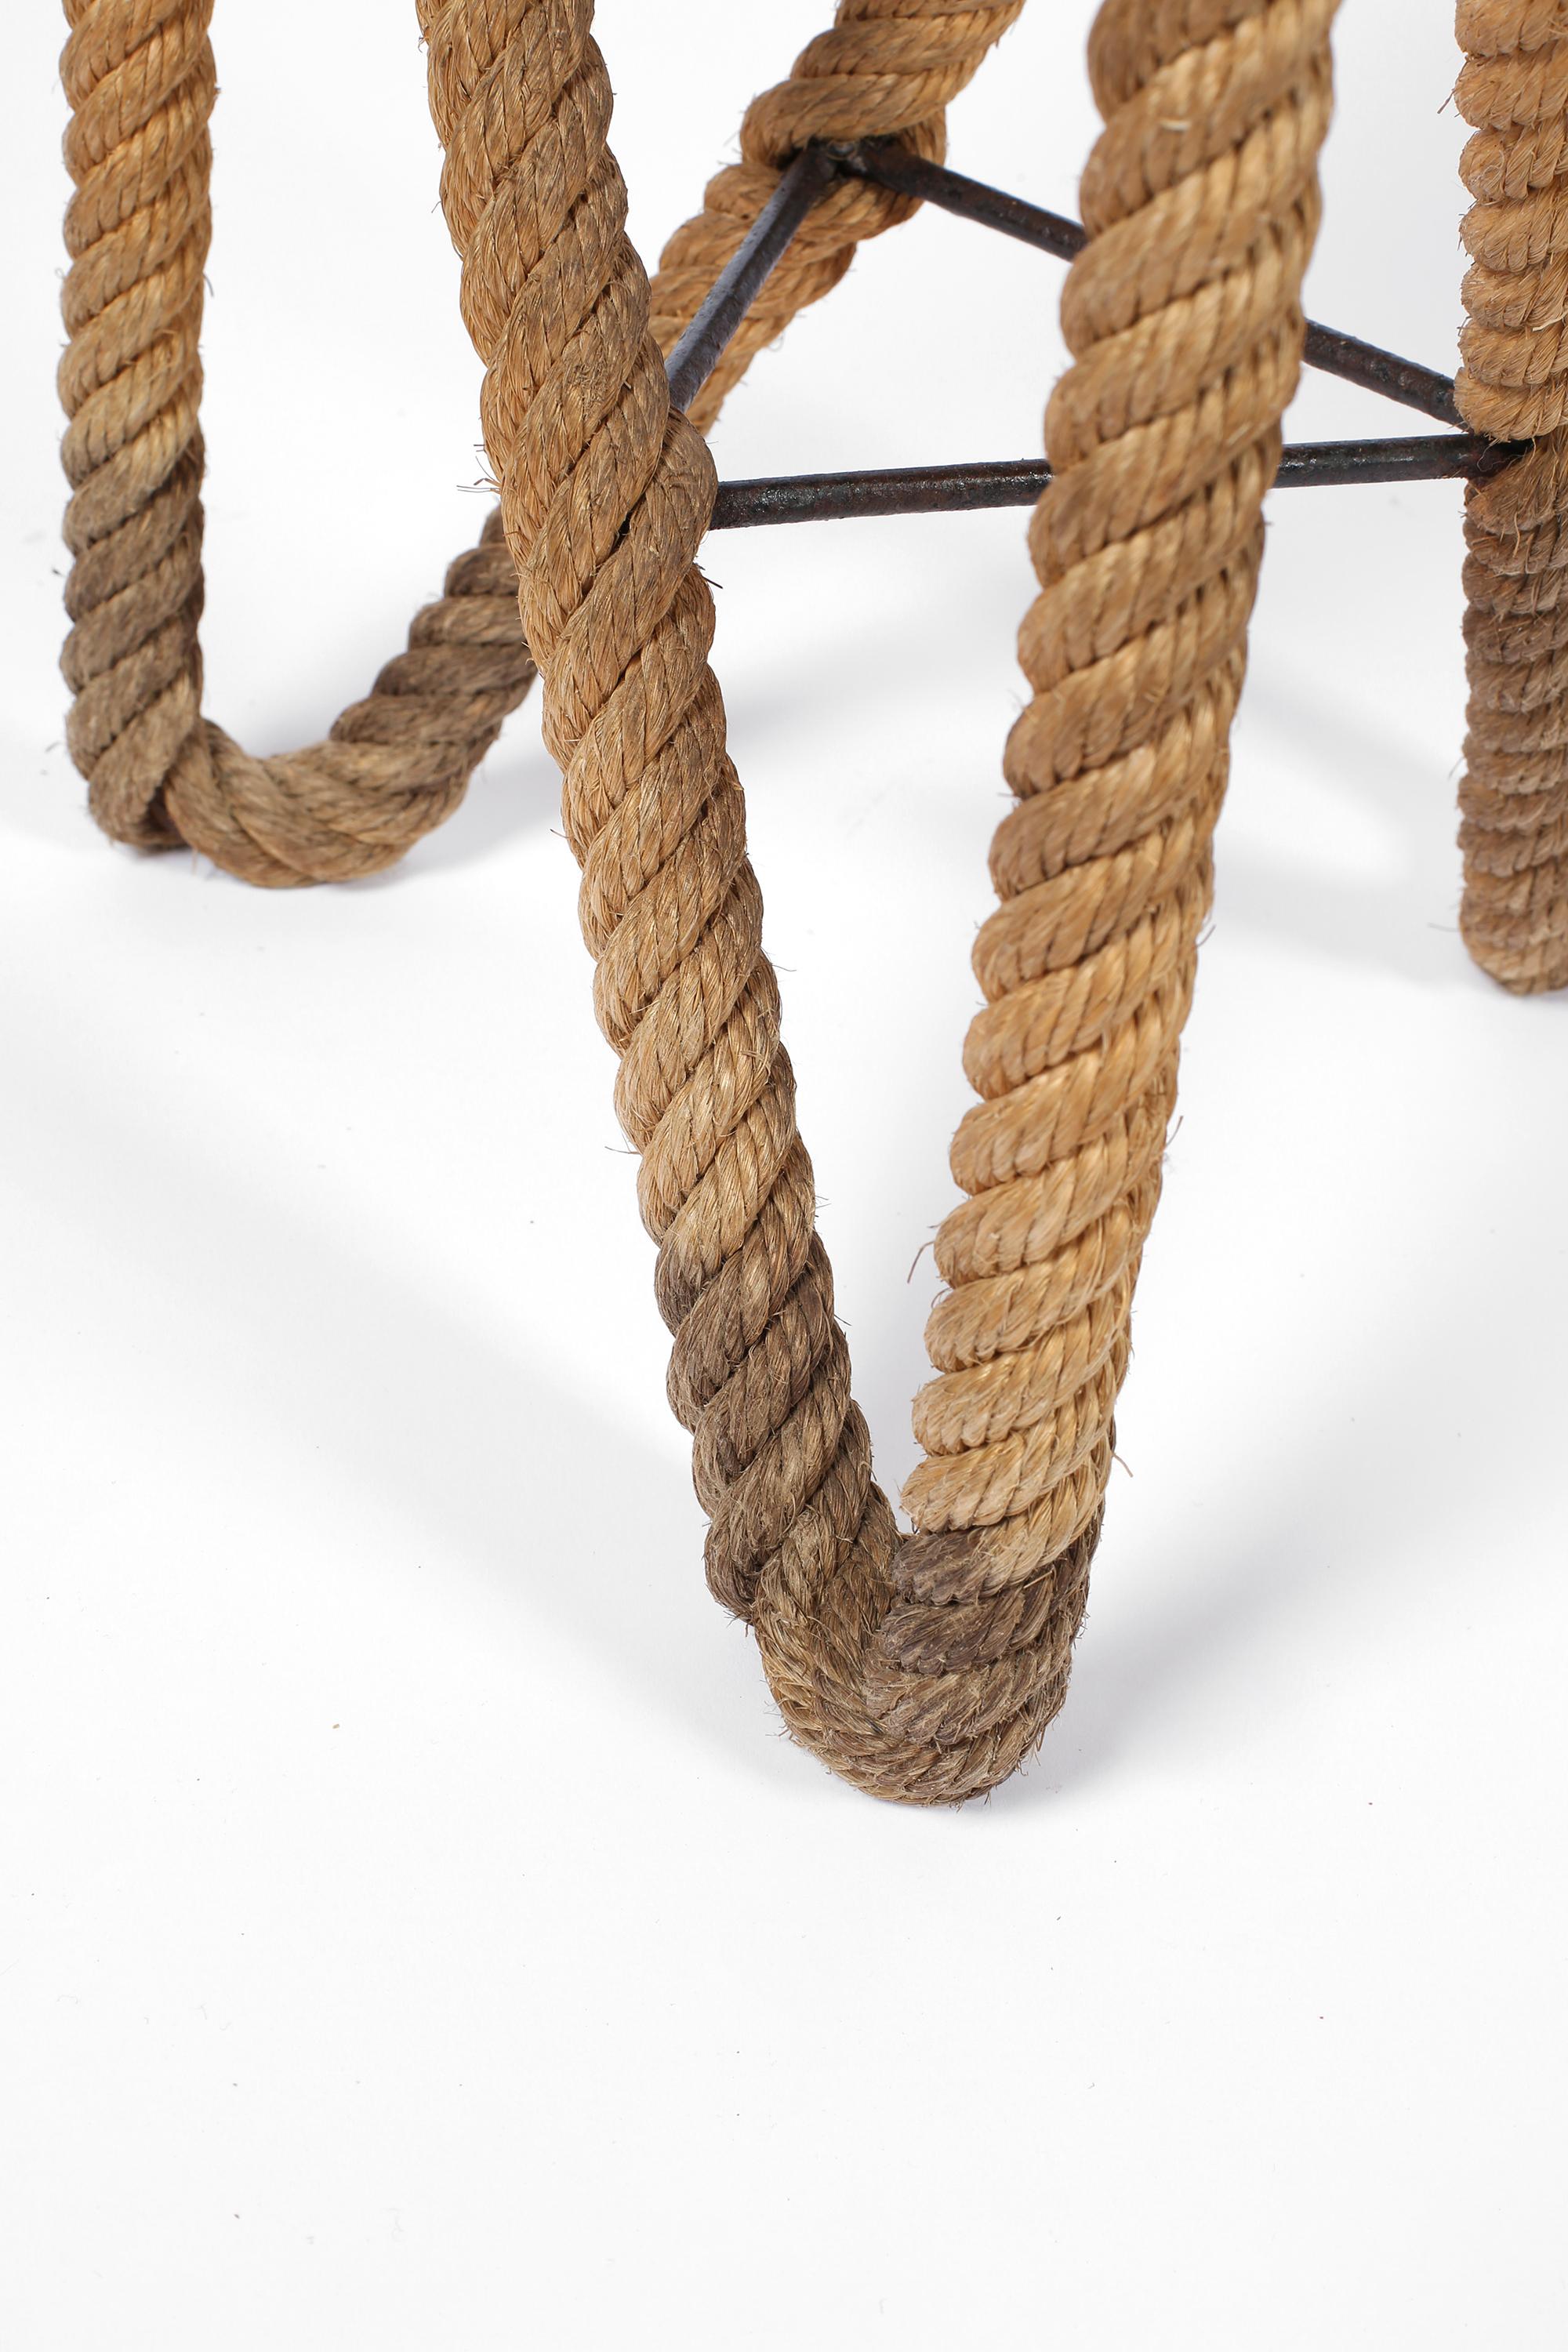 20th Century French 1950s Asymmetric Rope Stool by Audoux-Minnet Midcentury Modern